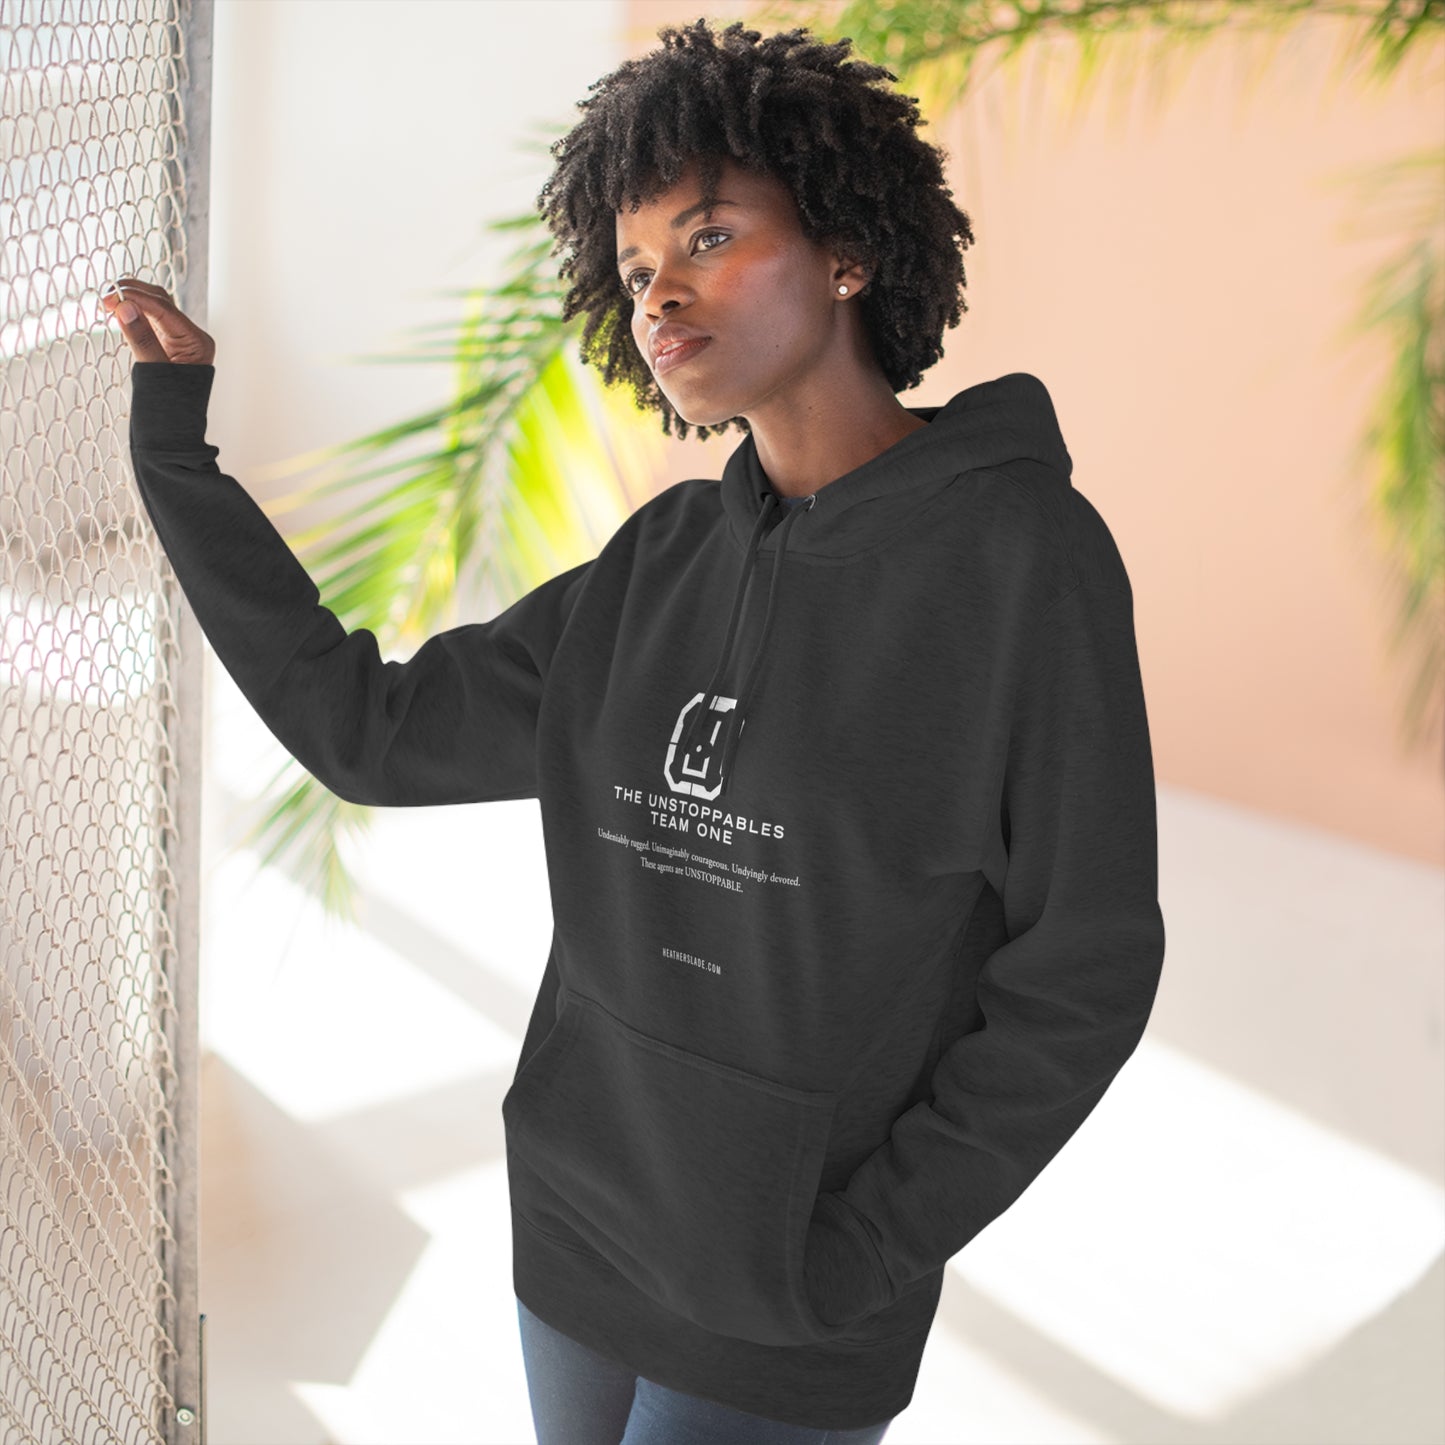 The Unstoppables Team One Pullover Hoodie